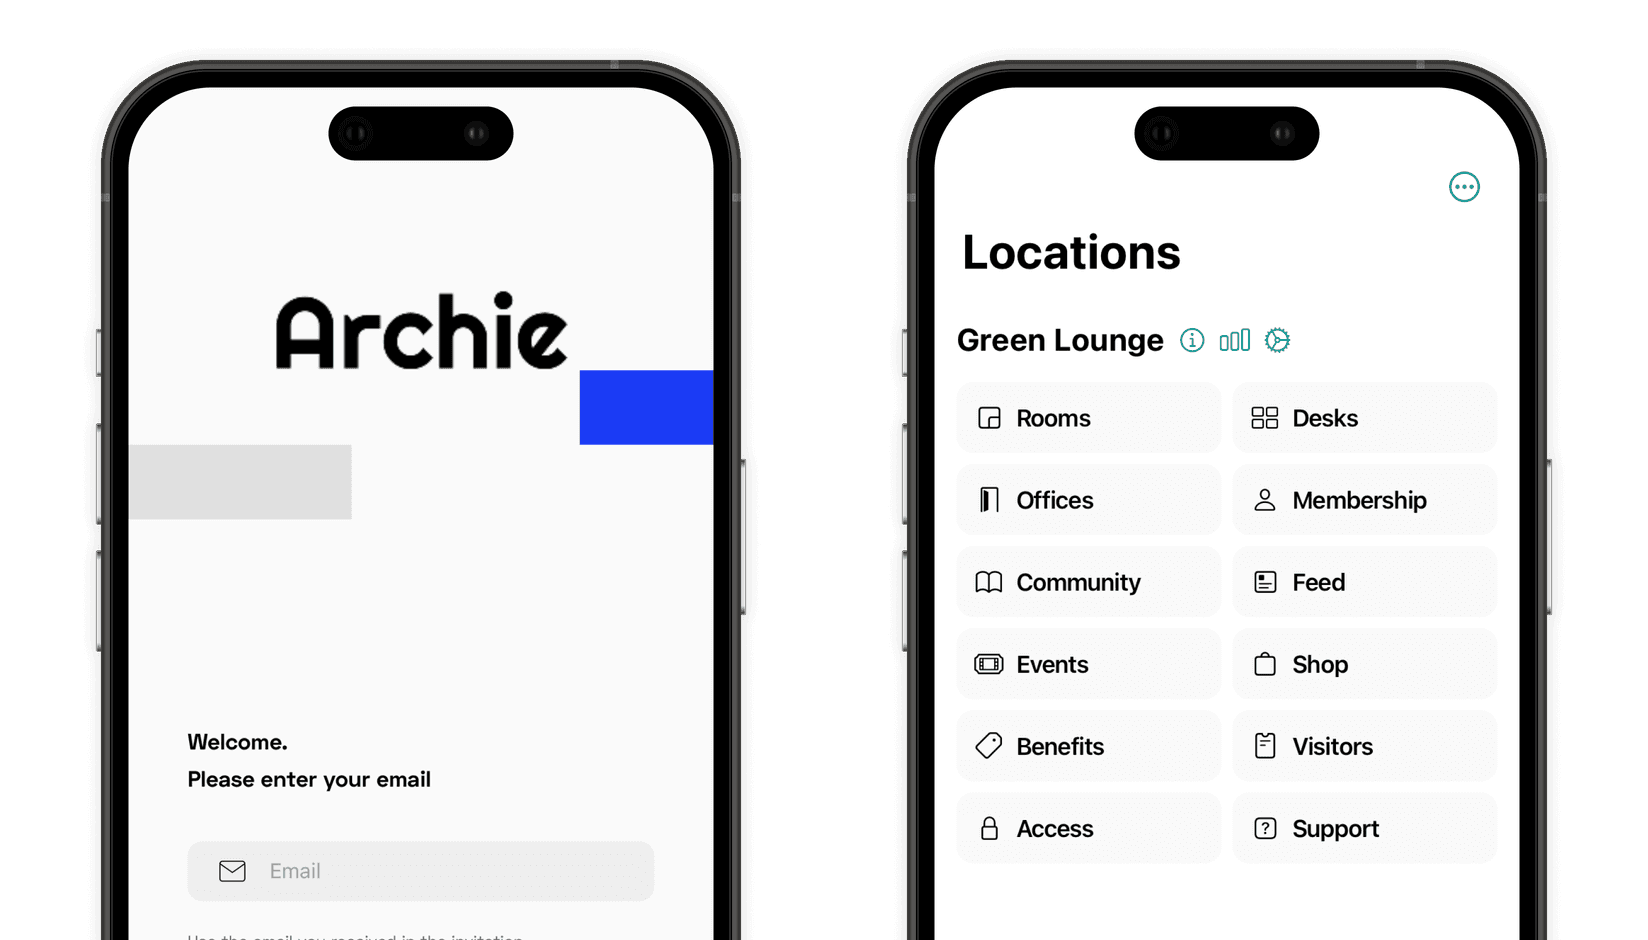 Spacebring mobile apps are for members, nonmembers and administrators while Archie offers only members' apps